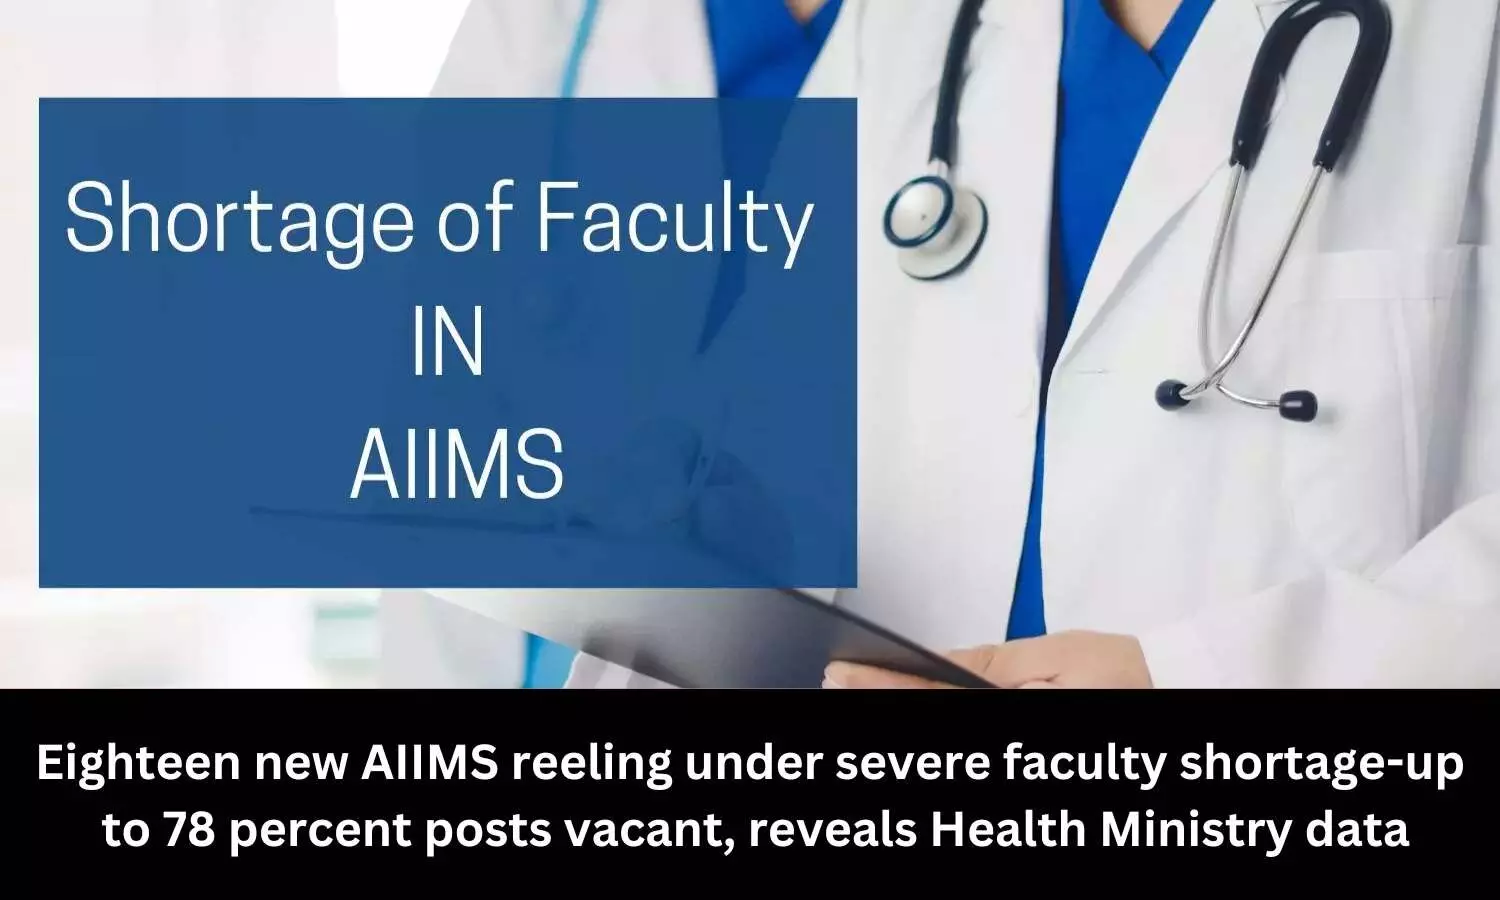 Faculty crunch at eighteen new AIIMS - Up to 78 percent posts vacant, reveals Health Ministry data